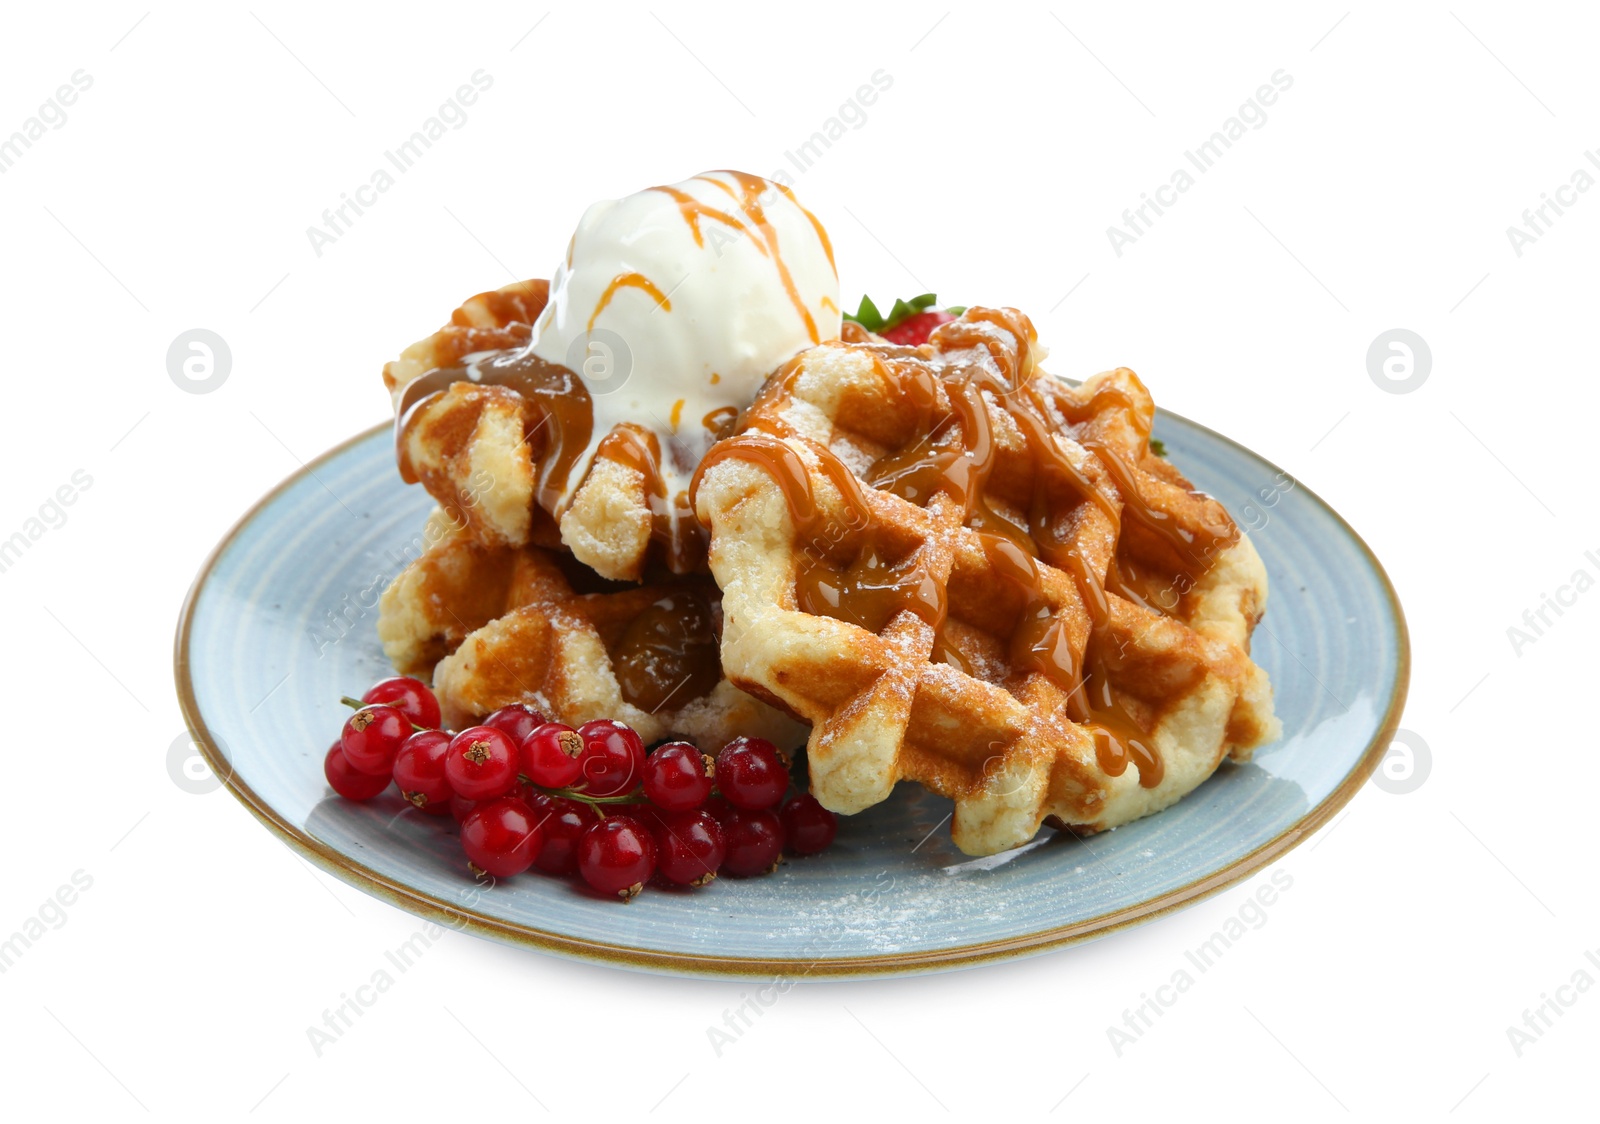 Photo of Tasty Belgian waffles with ice cream, red currants and caramel syrup on white background